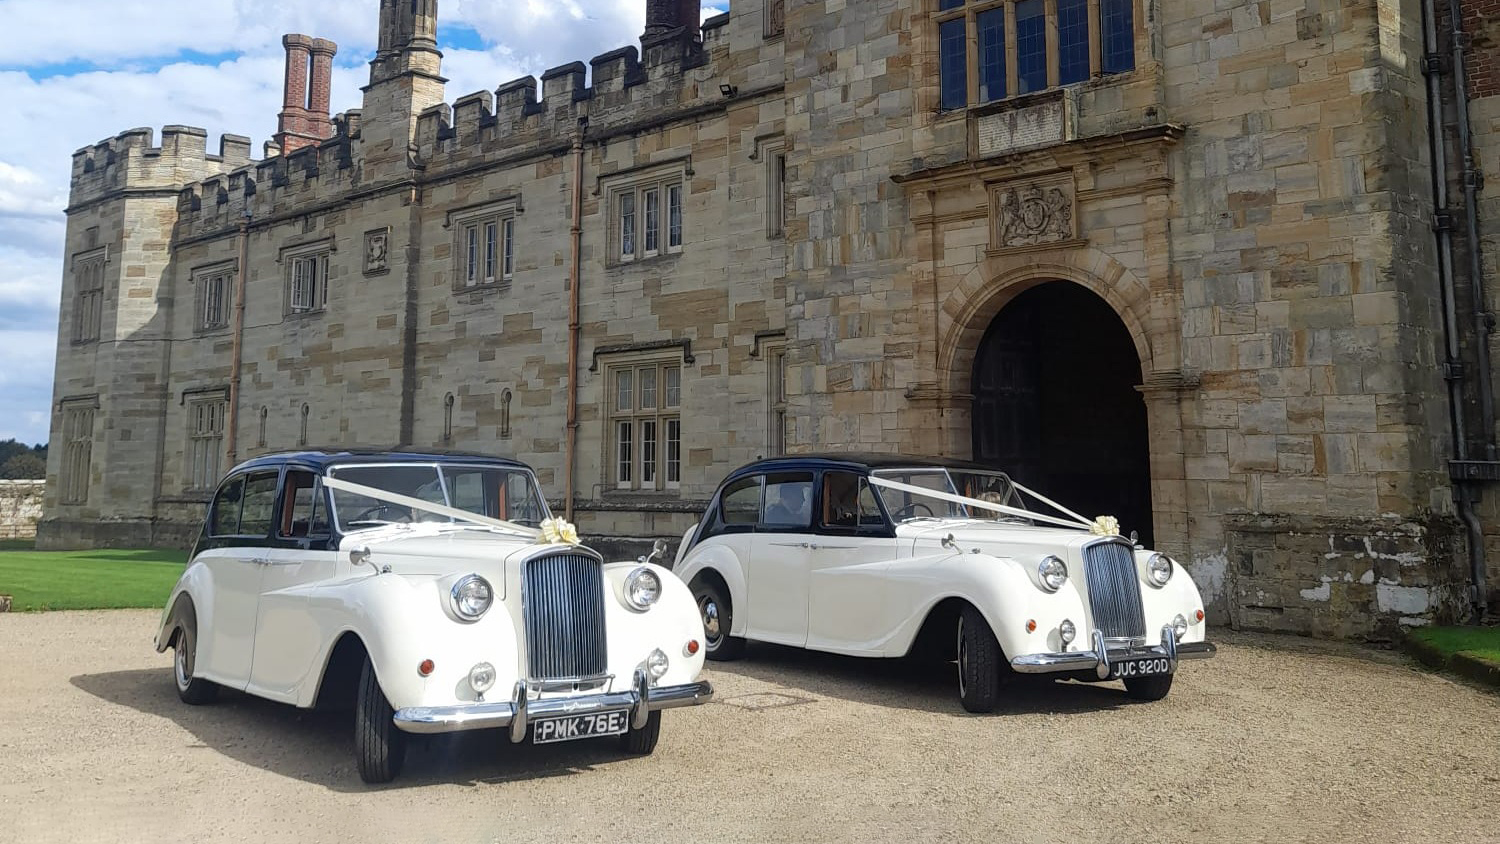 Two Classic Austin Princess Limousine decorated with Ivory Ribbons and Bows on top of the front grill. Vehicles are parked in front of a large manor house in Cranbrook